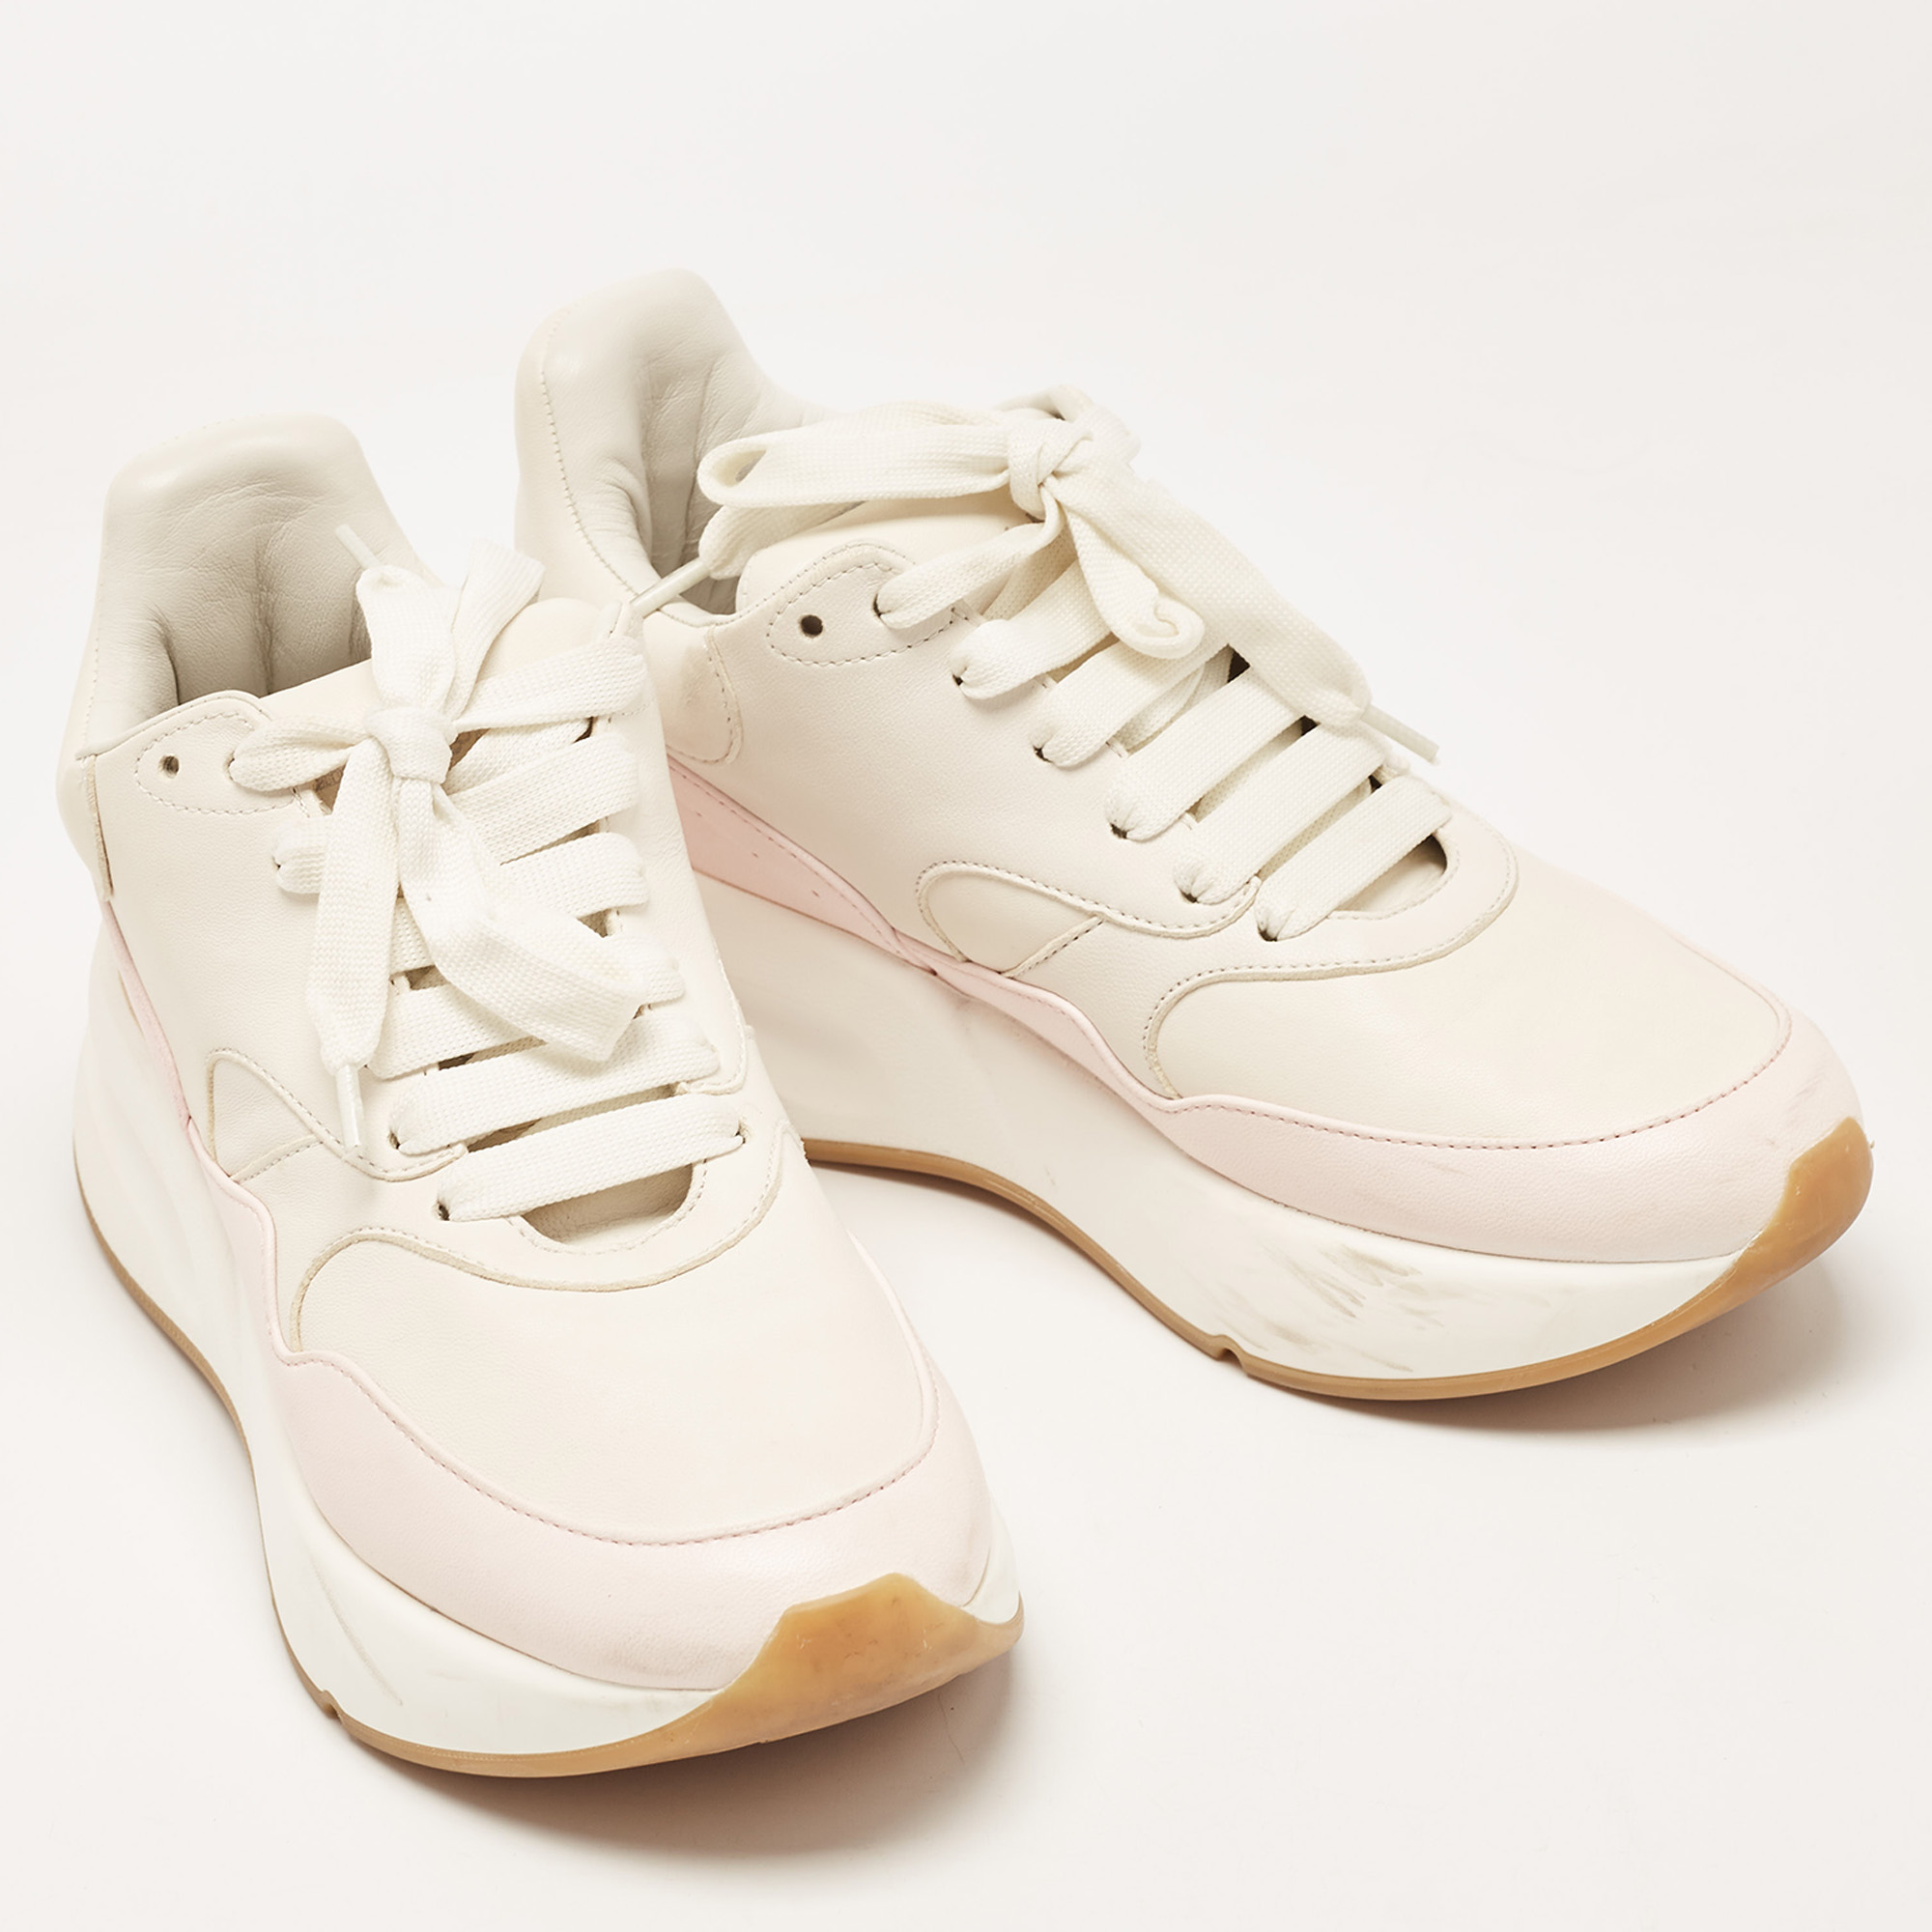 Alexander McQueen Off White/Pink Leather Lace Up Sneakers Size 38